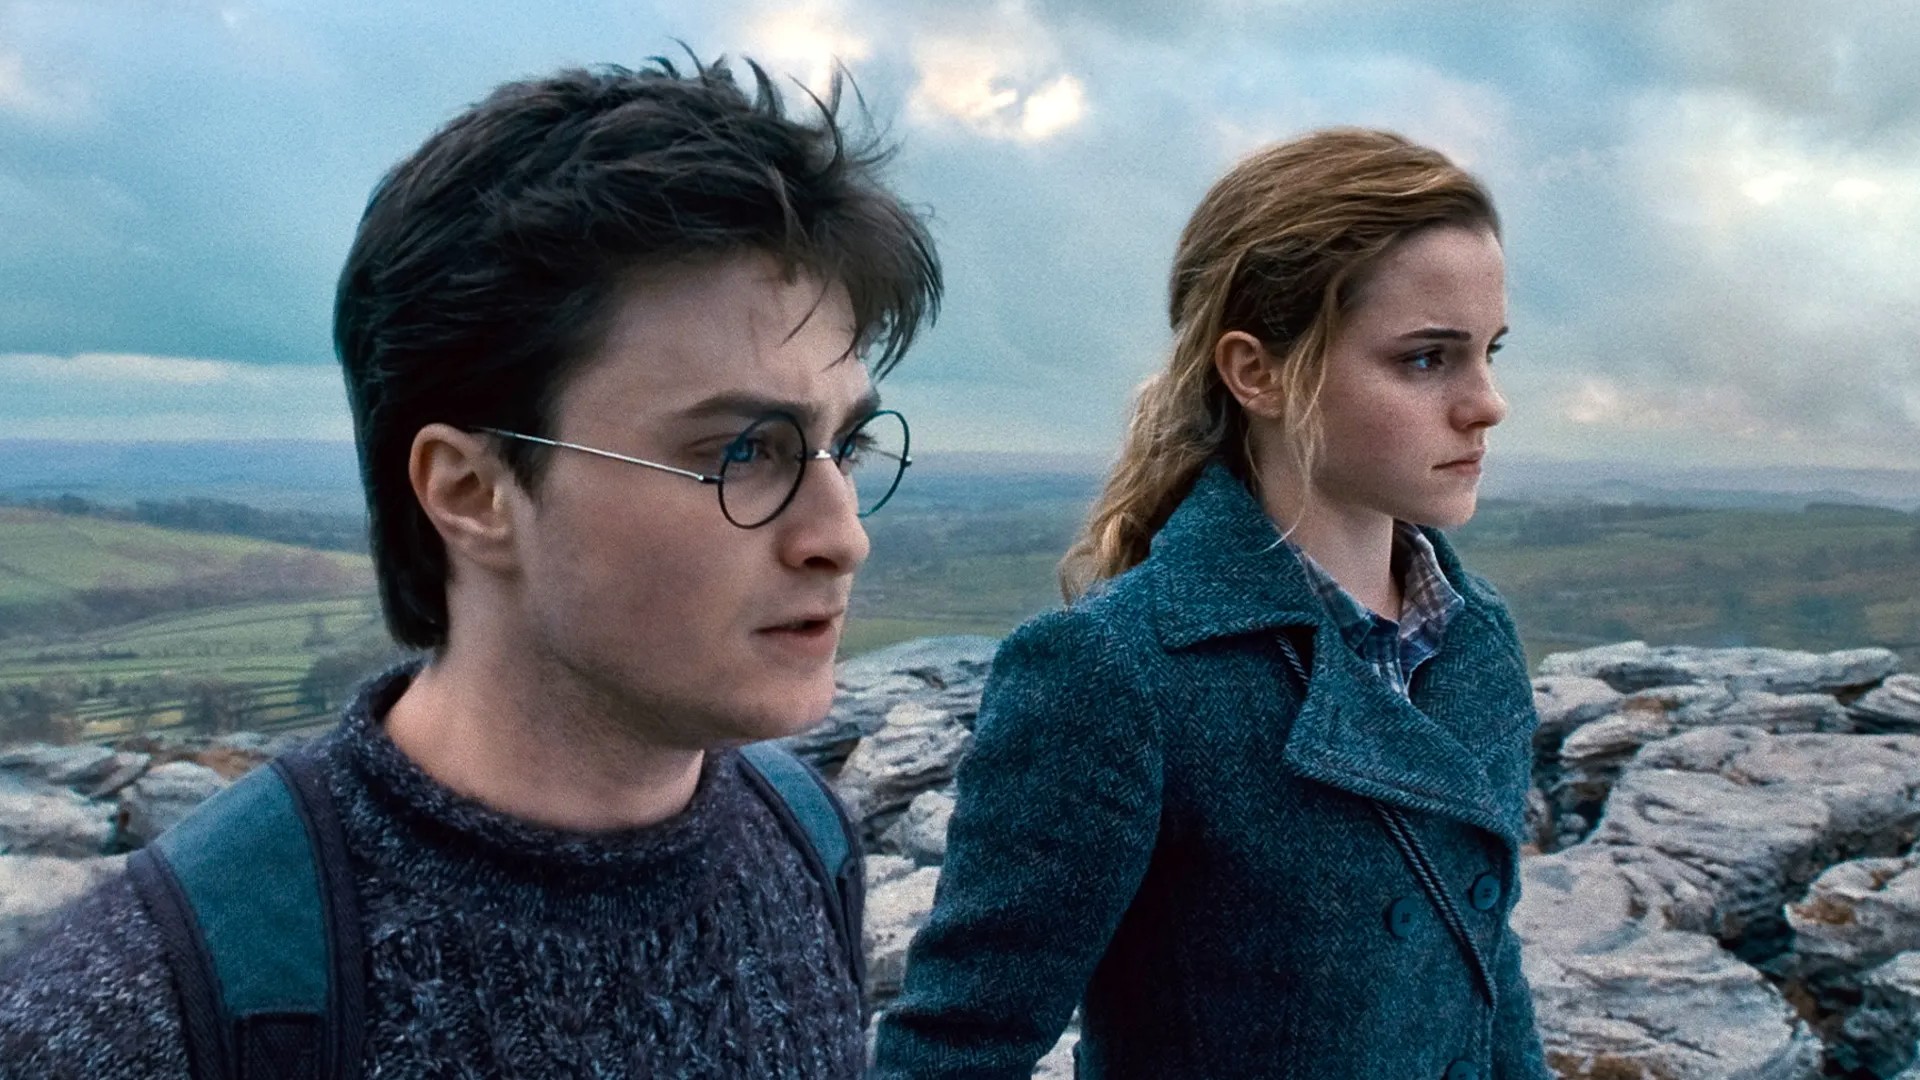 Can You Pass This Trivia Quiz On Harry Potter and the Deathly Hallows?